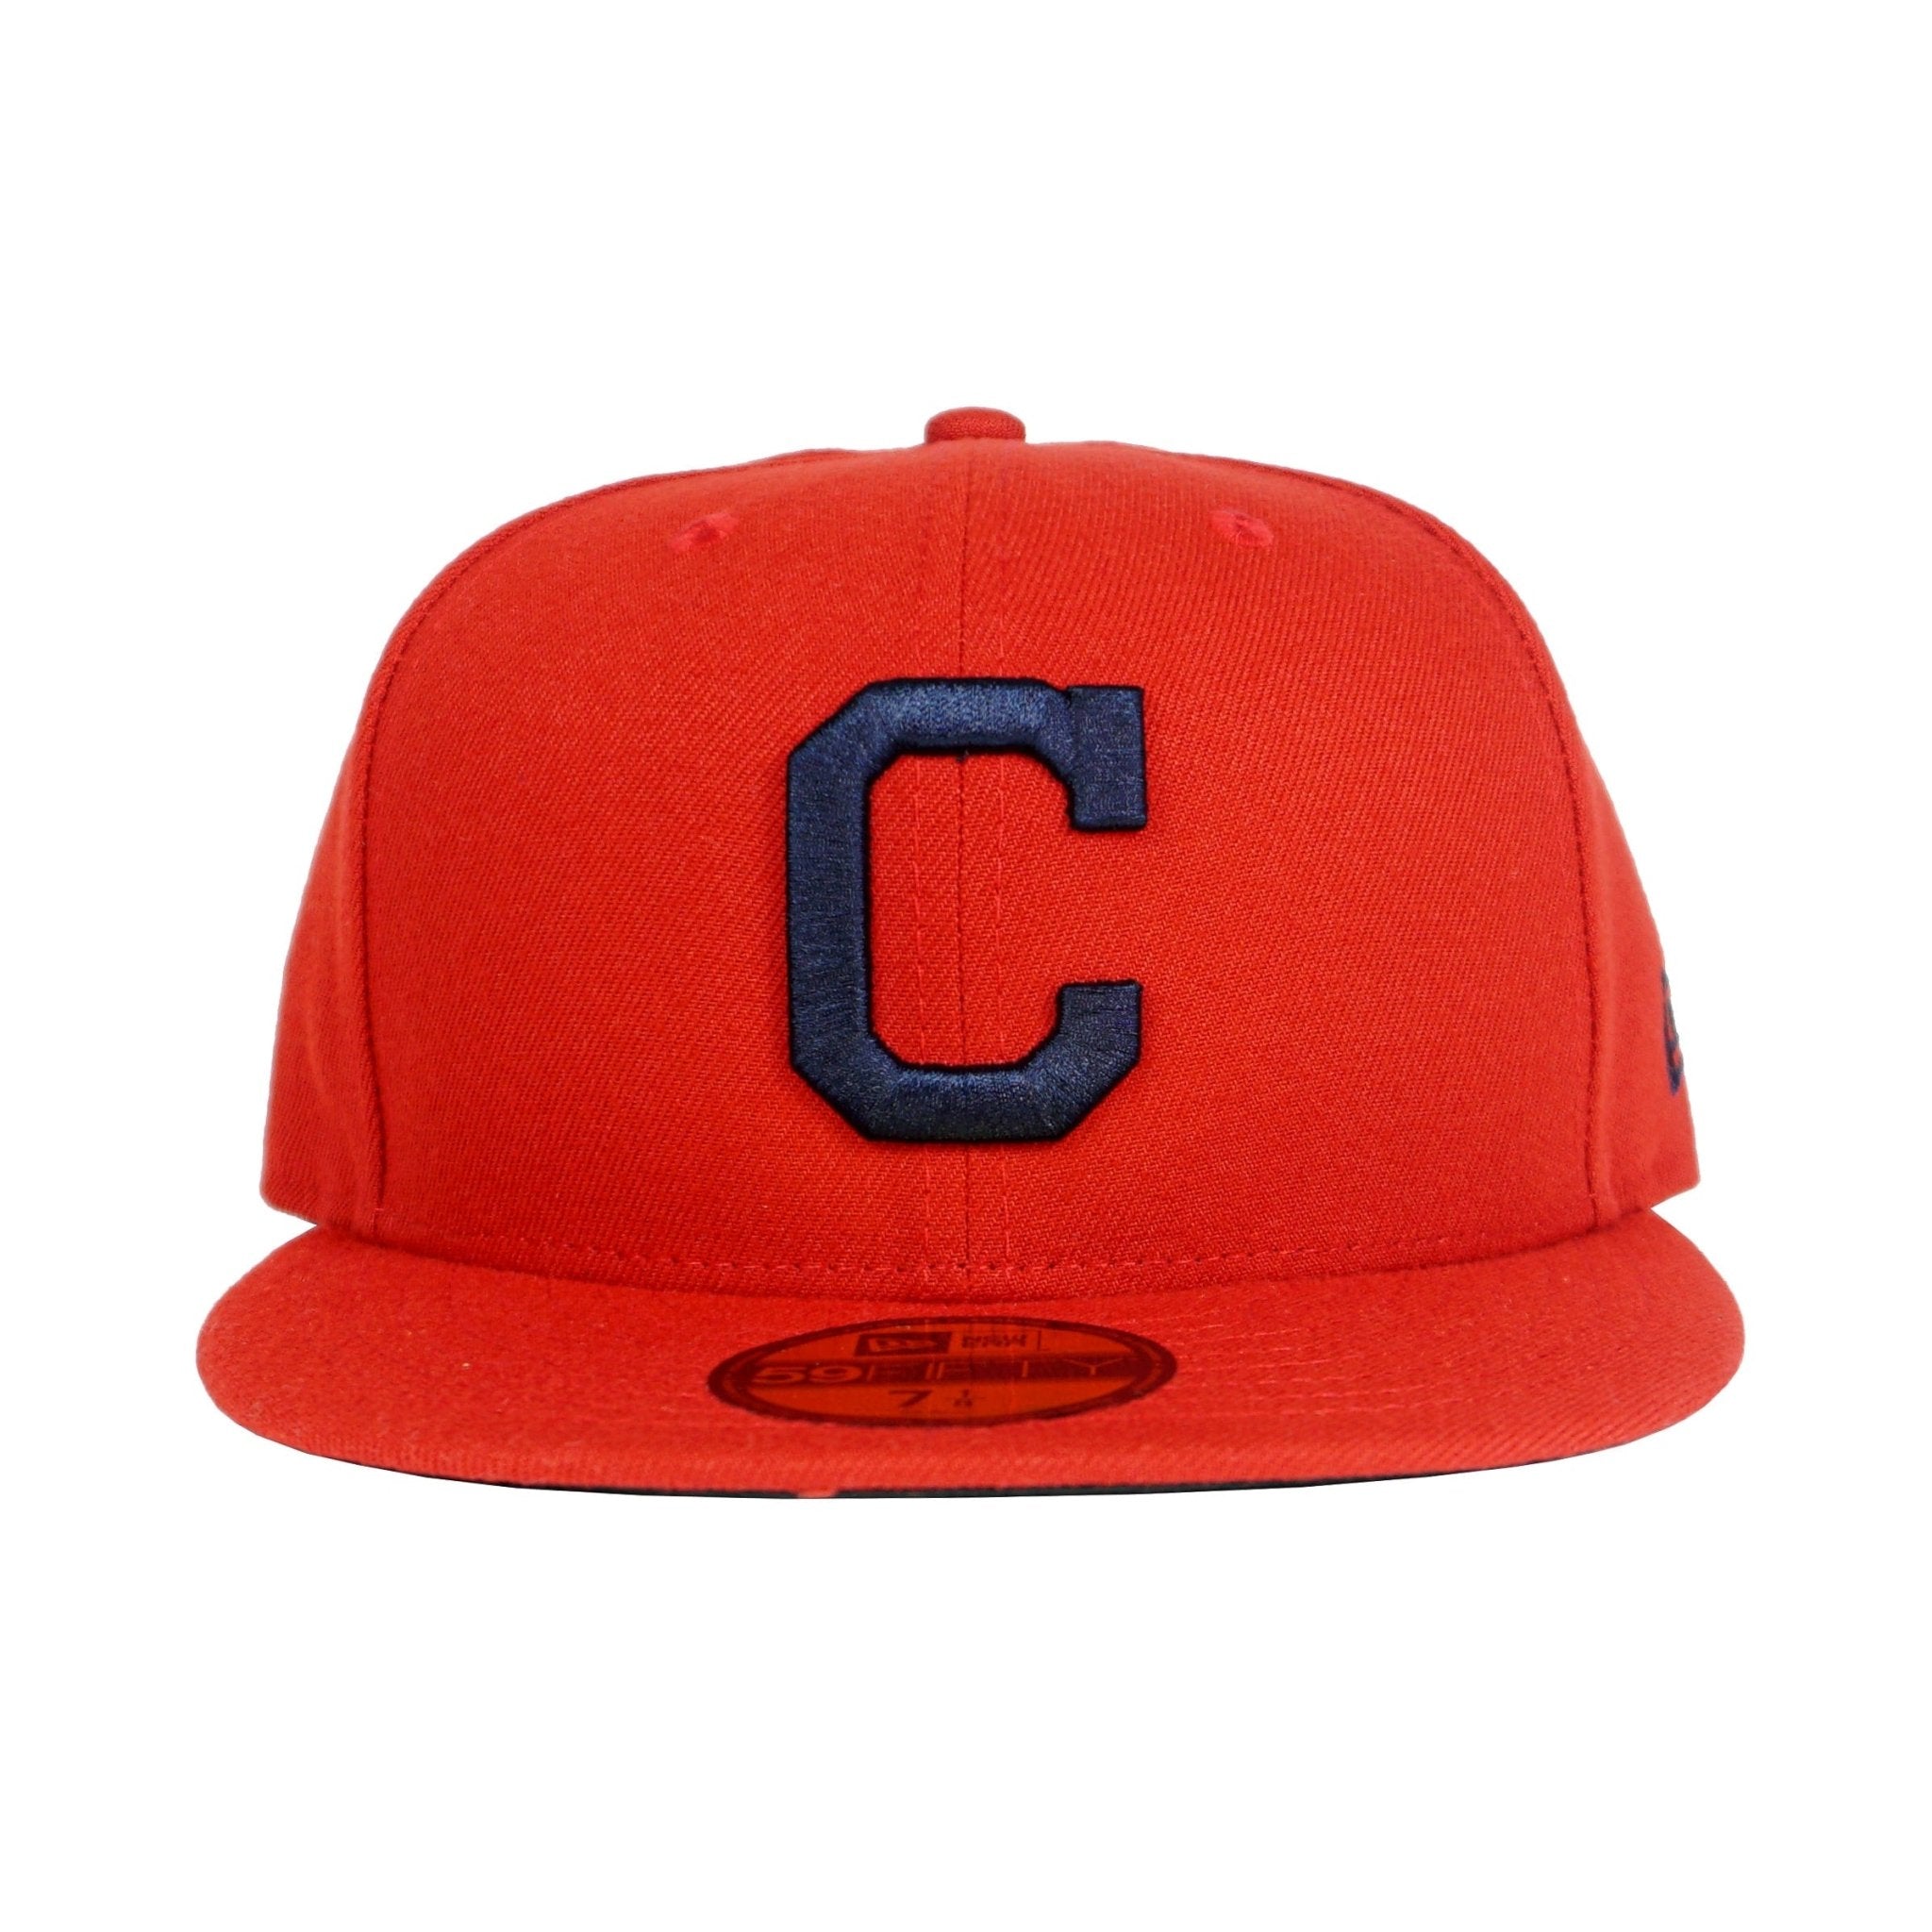 Cleveland Indians Alternate Authentic Collection 59Fifty Fitted Hat in red and navy - New Era - State Of Flux